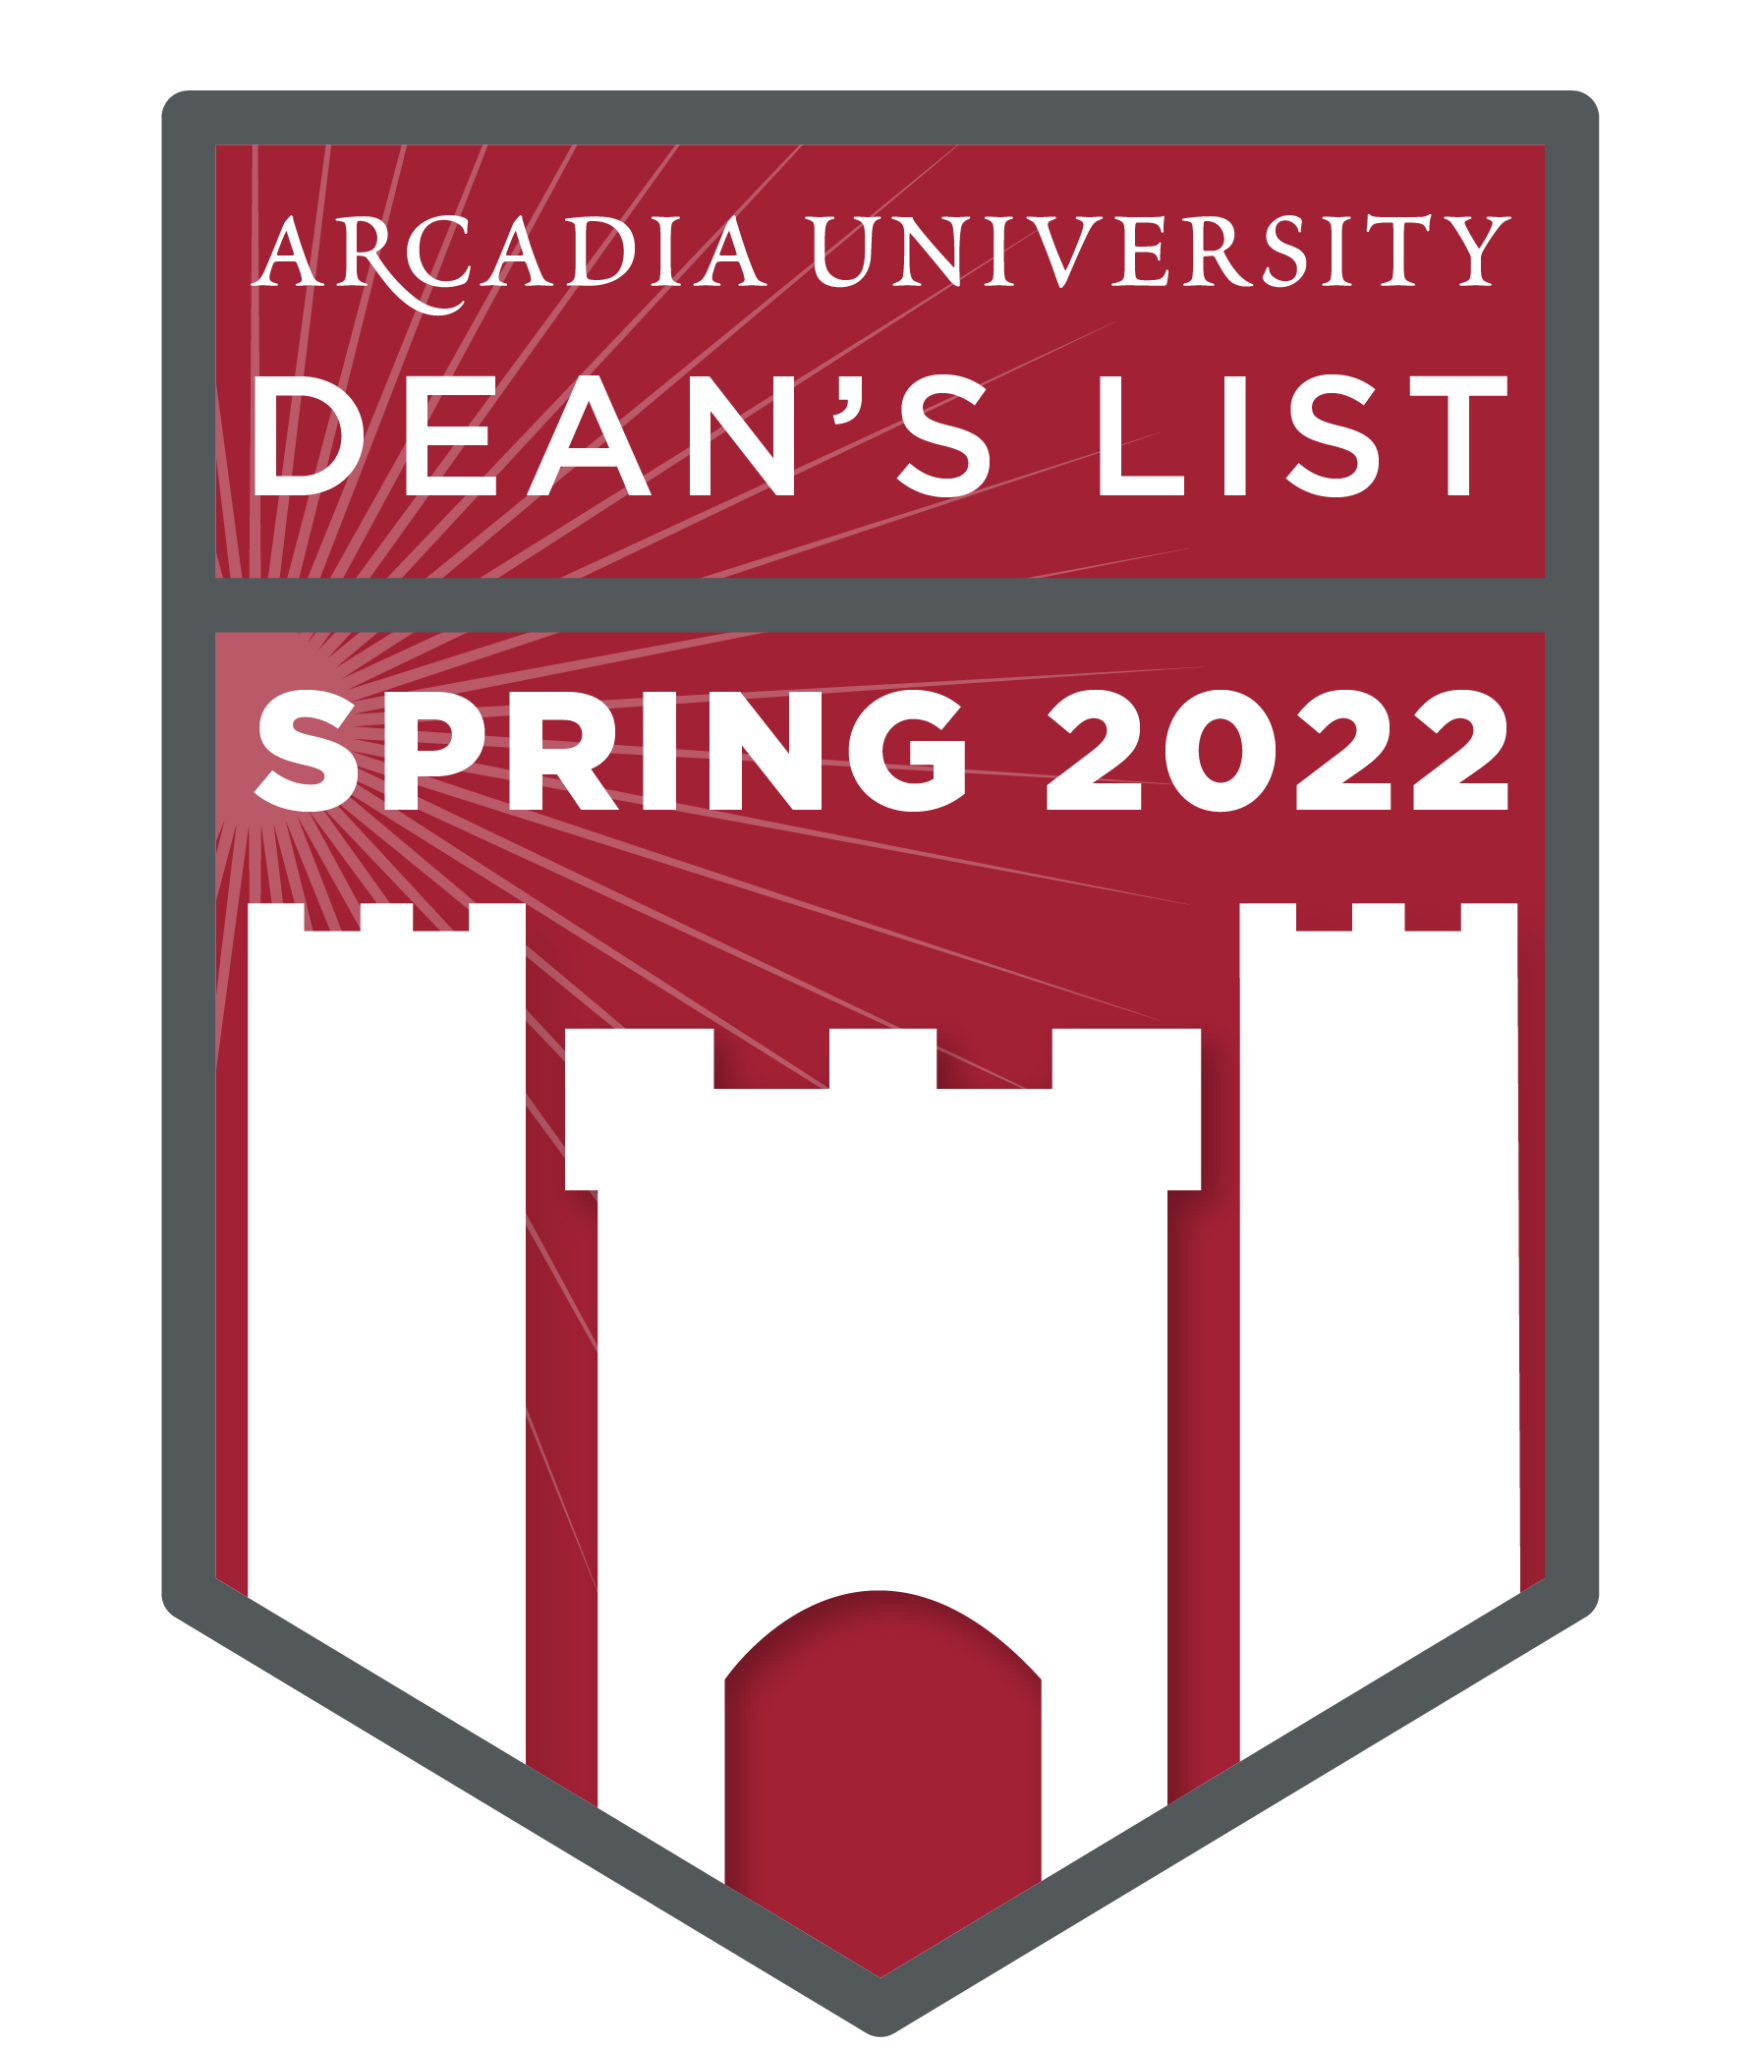 The badge for the spring of 2023-22 Honors Deans List at Arcadia.